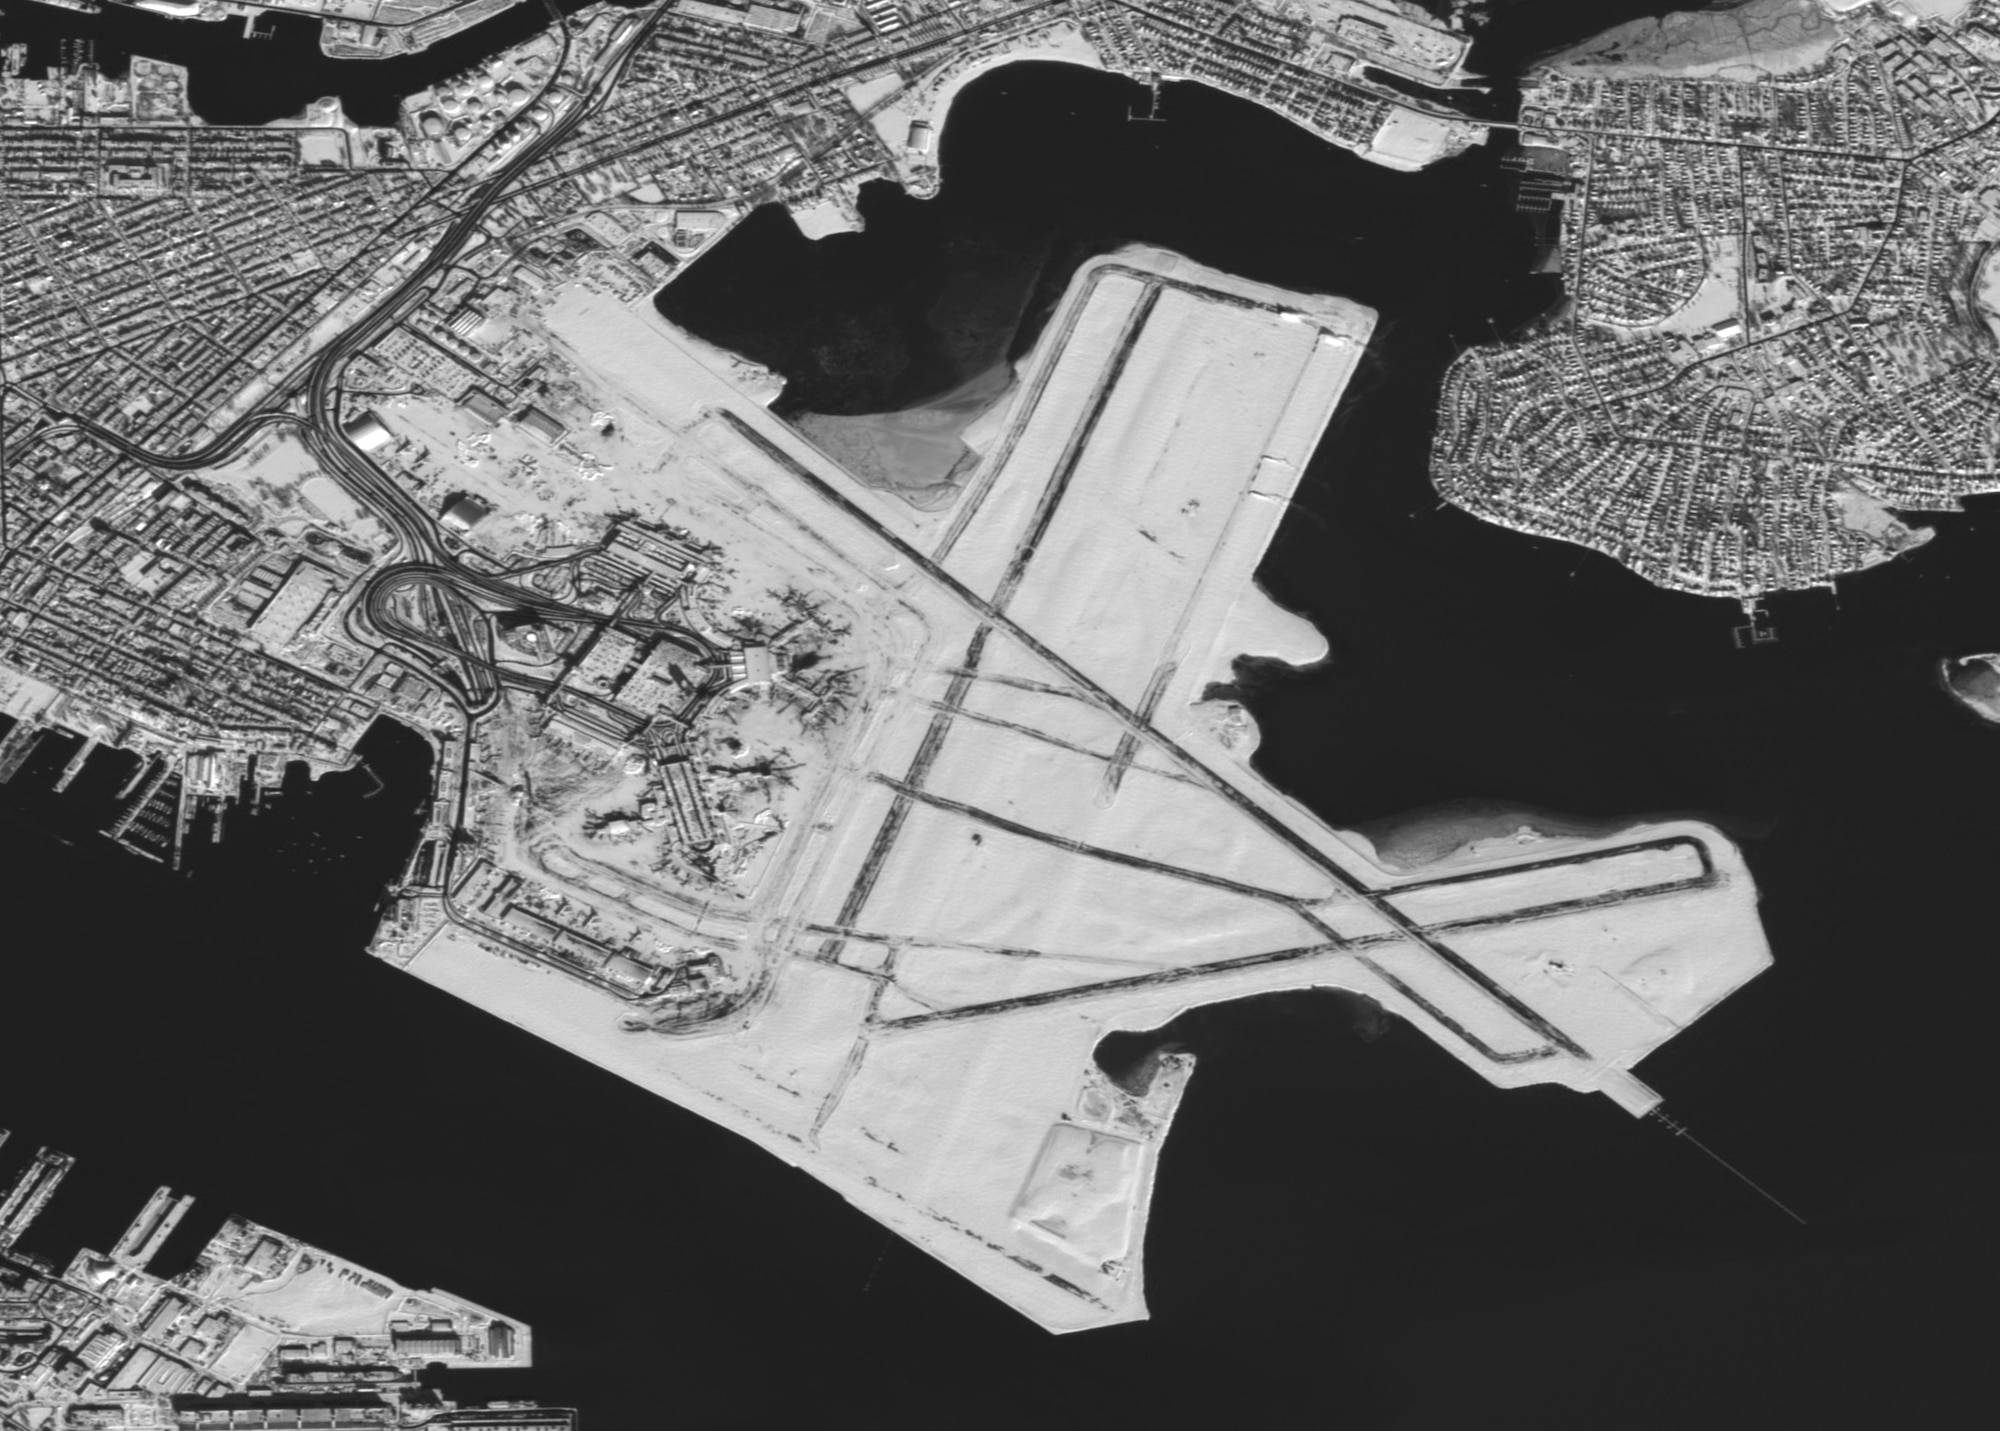 A 2.5 meter image of the Boston Logan International Airport (BOS) taken from the SPOT-5 satellite on February 10, 2013.  BOS averages over 900 flights per day and was forced to cancel flights after receiving up to 24.9 inches of snow. The airport gradually resumed normal operations by February 11, 2013.
(National Guard satellite image courtesy 169th Communications Flight, Eagle Vision IV/RELEASED)
